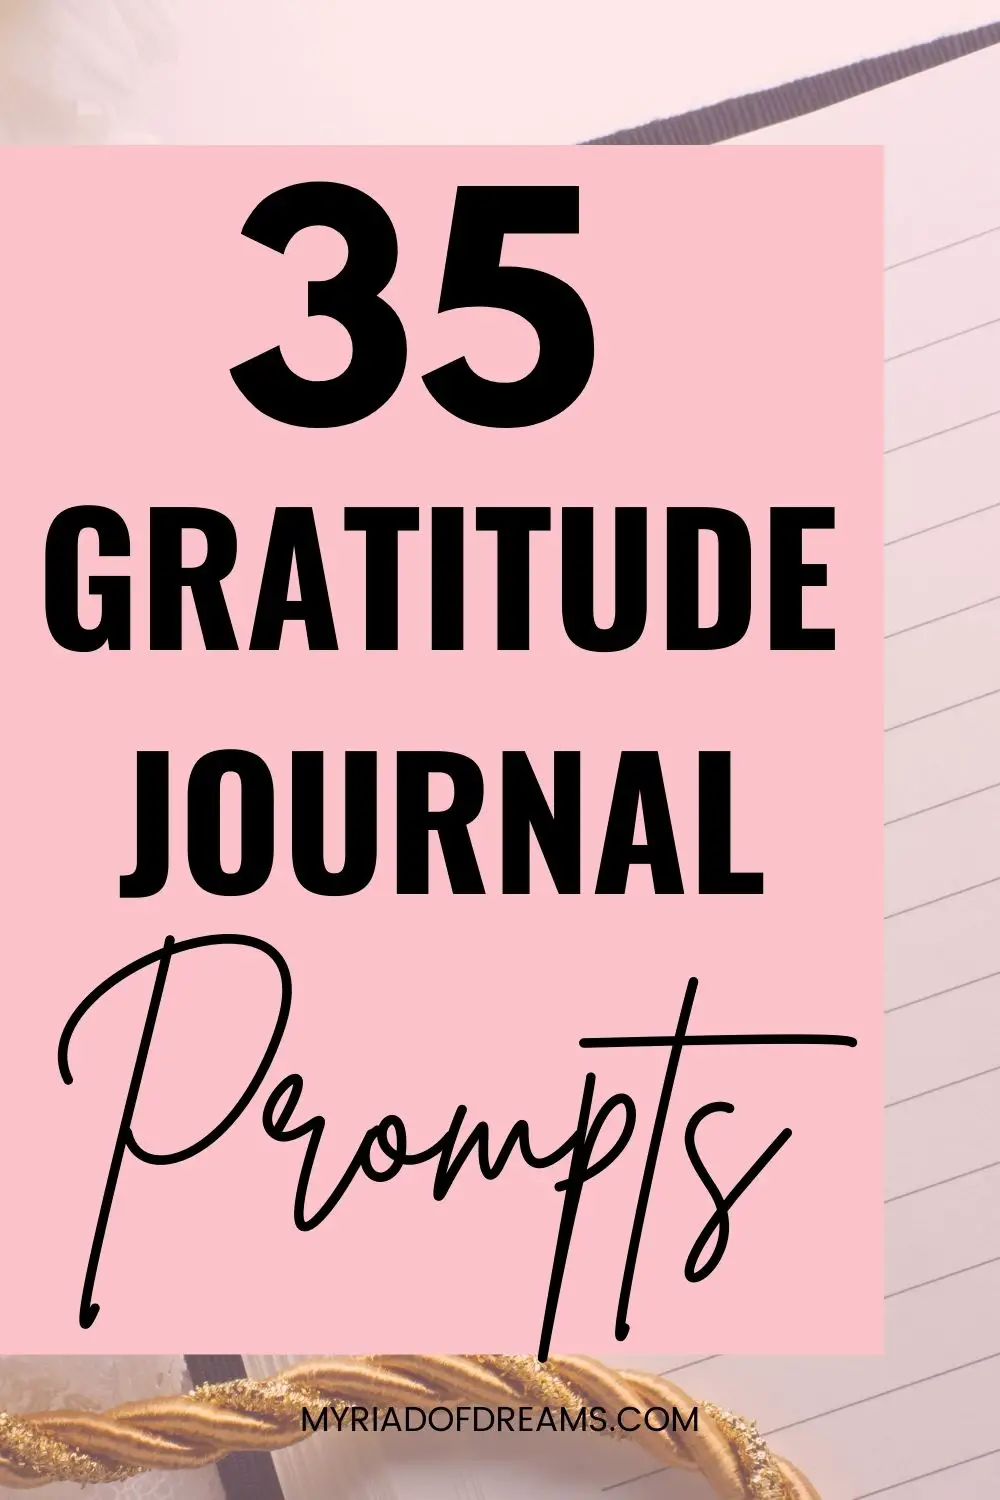 Daily gratitude journal prompts to create more thankfulness in life. Learn the benefits of gratitude journaling and live your best life.